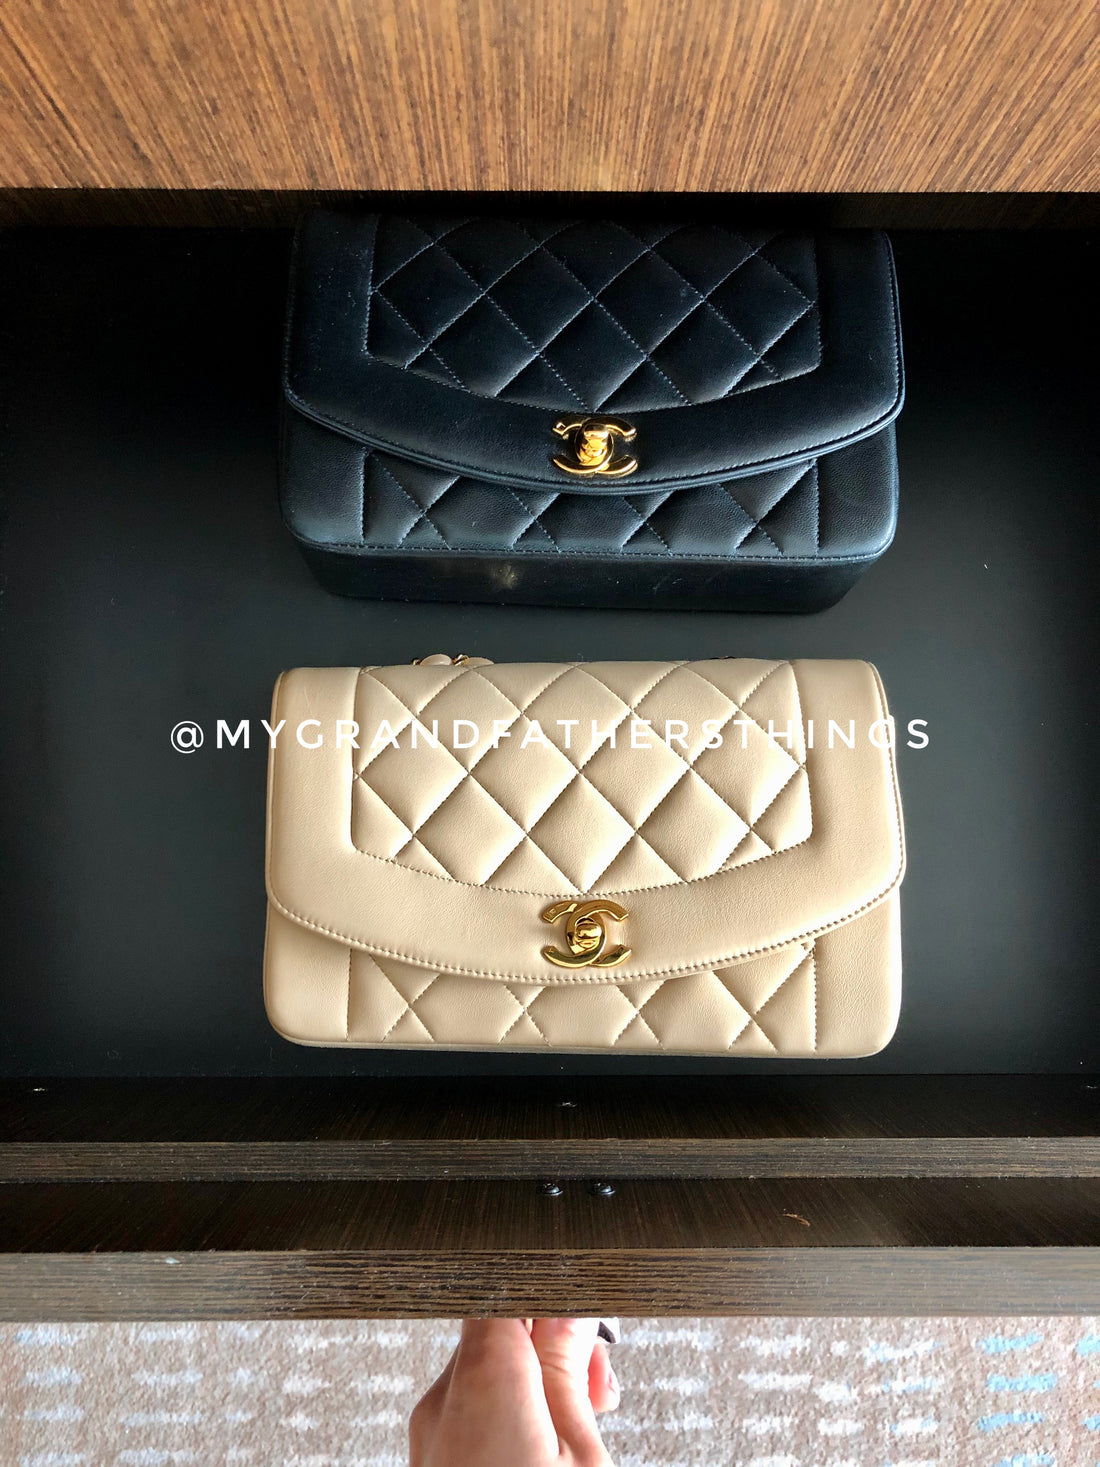 CHANEL, Bags, Authentic Chanel Shopping Bag